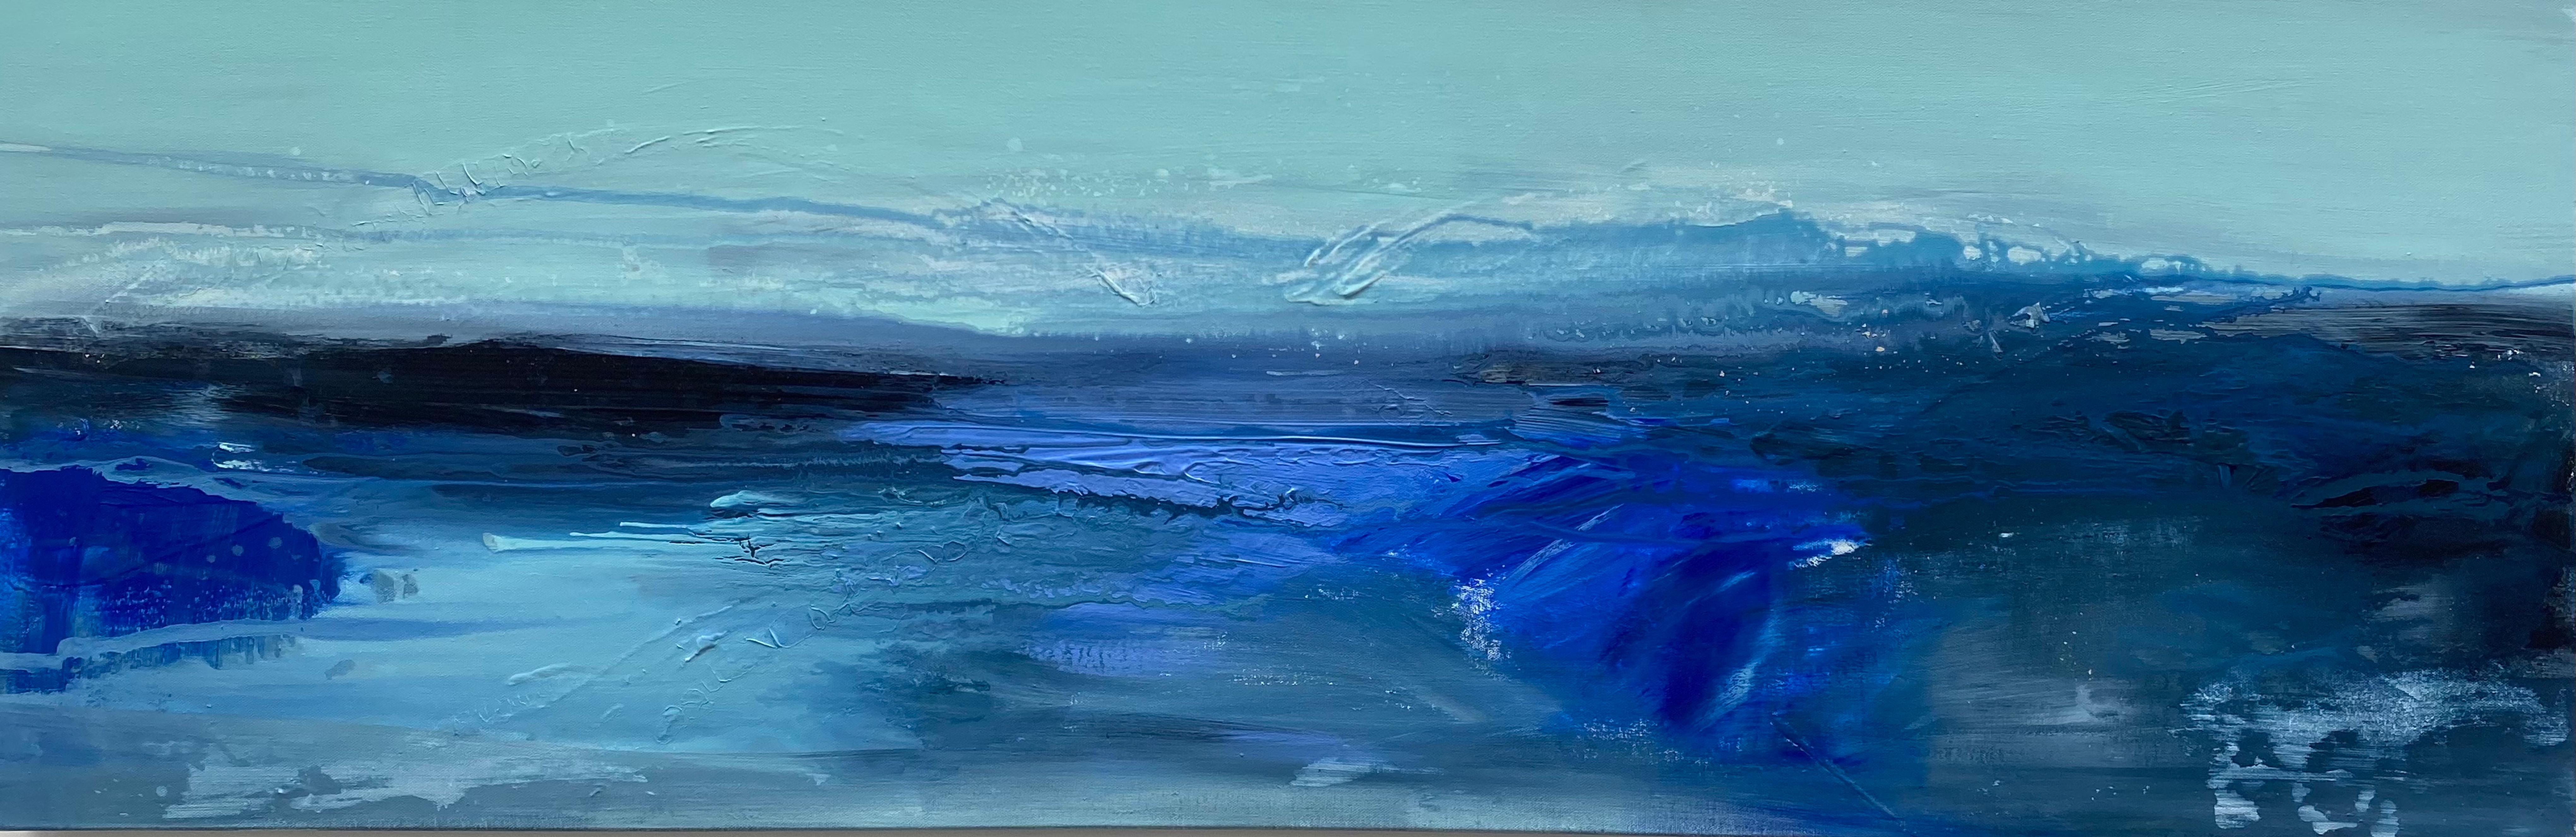 Kathleen Rhee Abstract Painting - Blue ocean water abstract expressionist sea landscape sky 